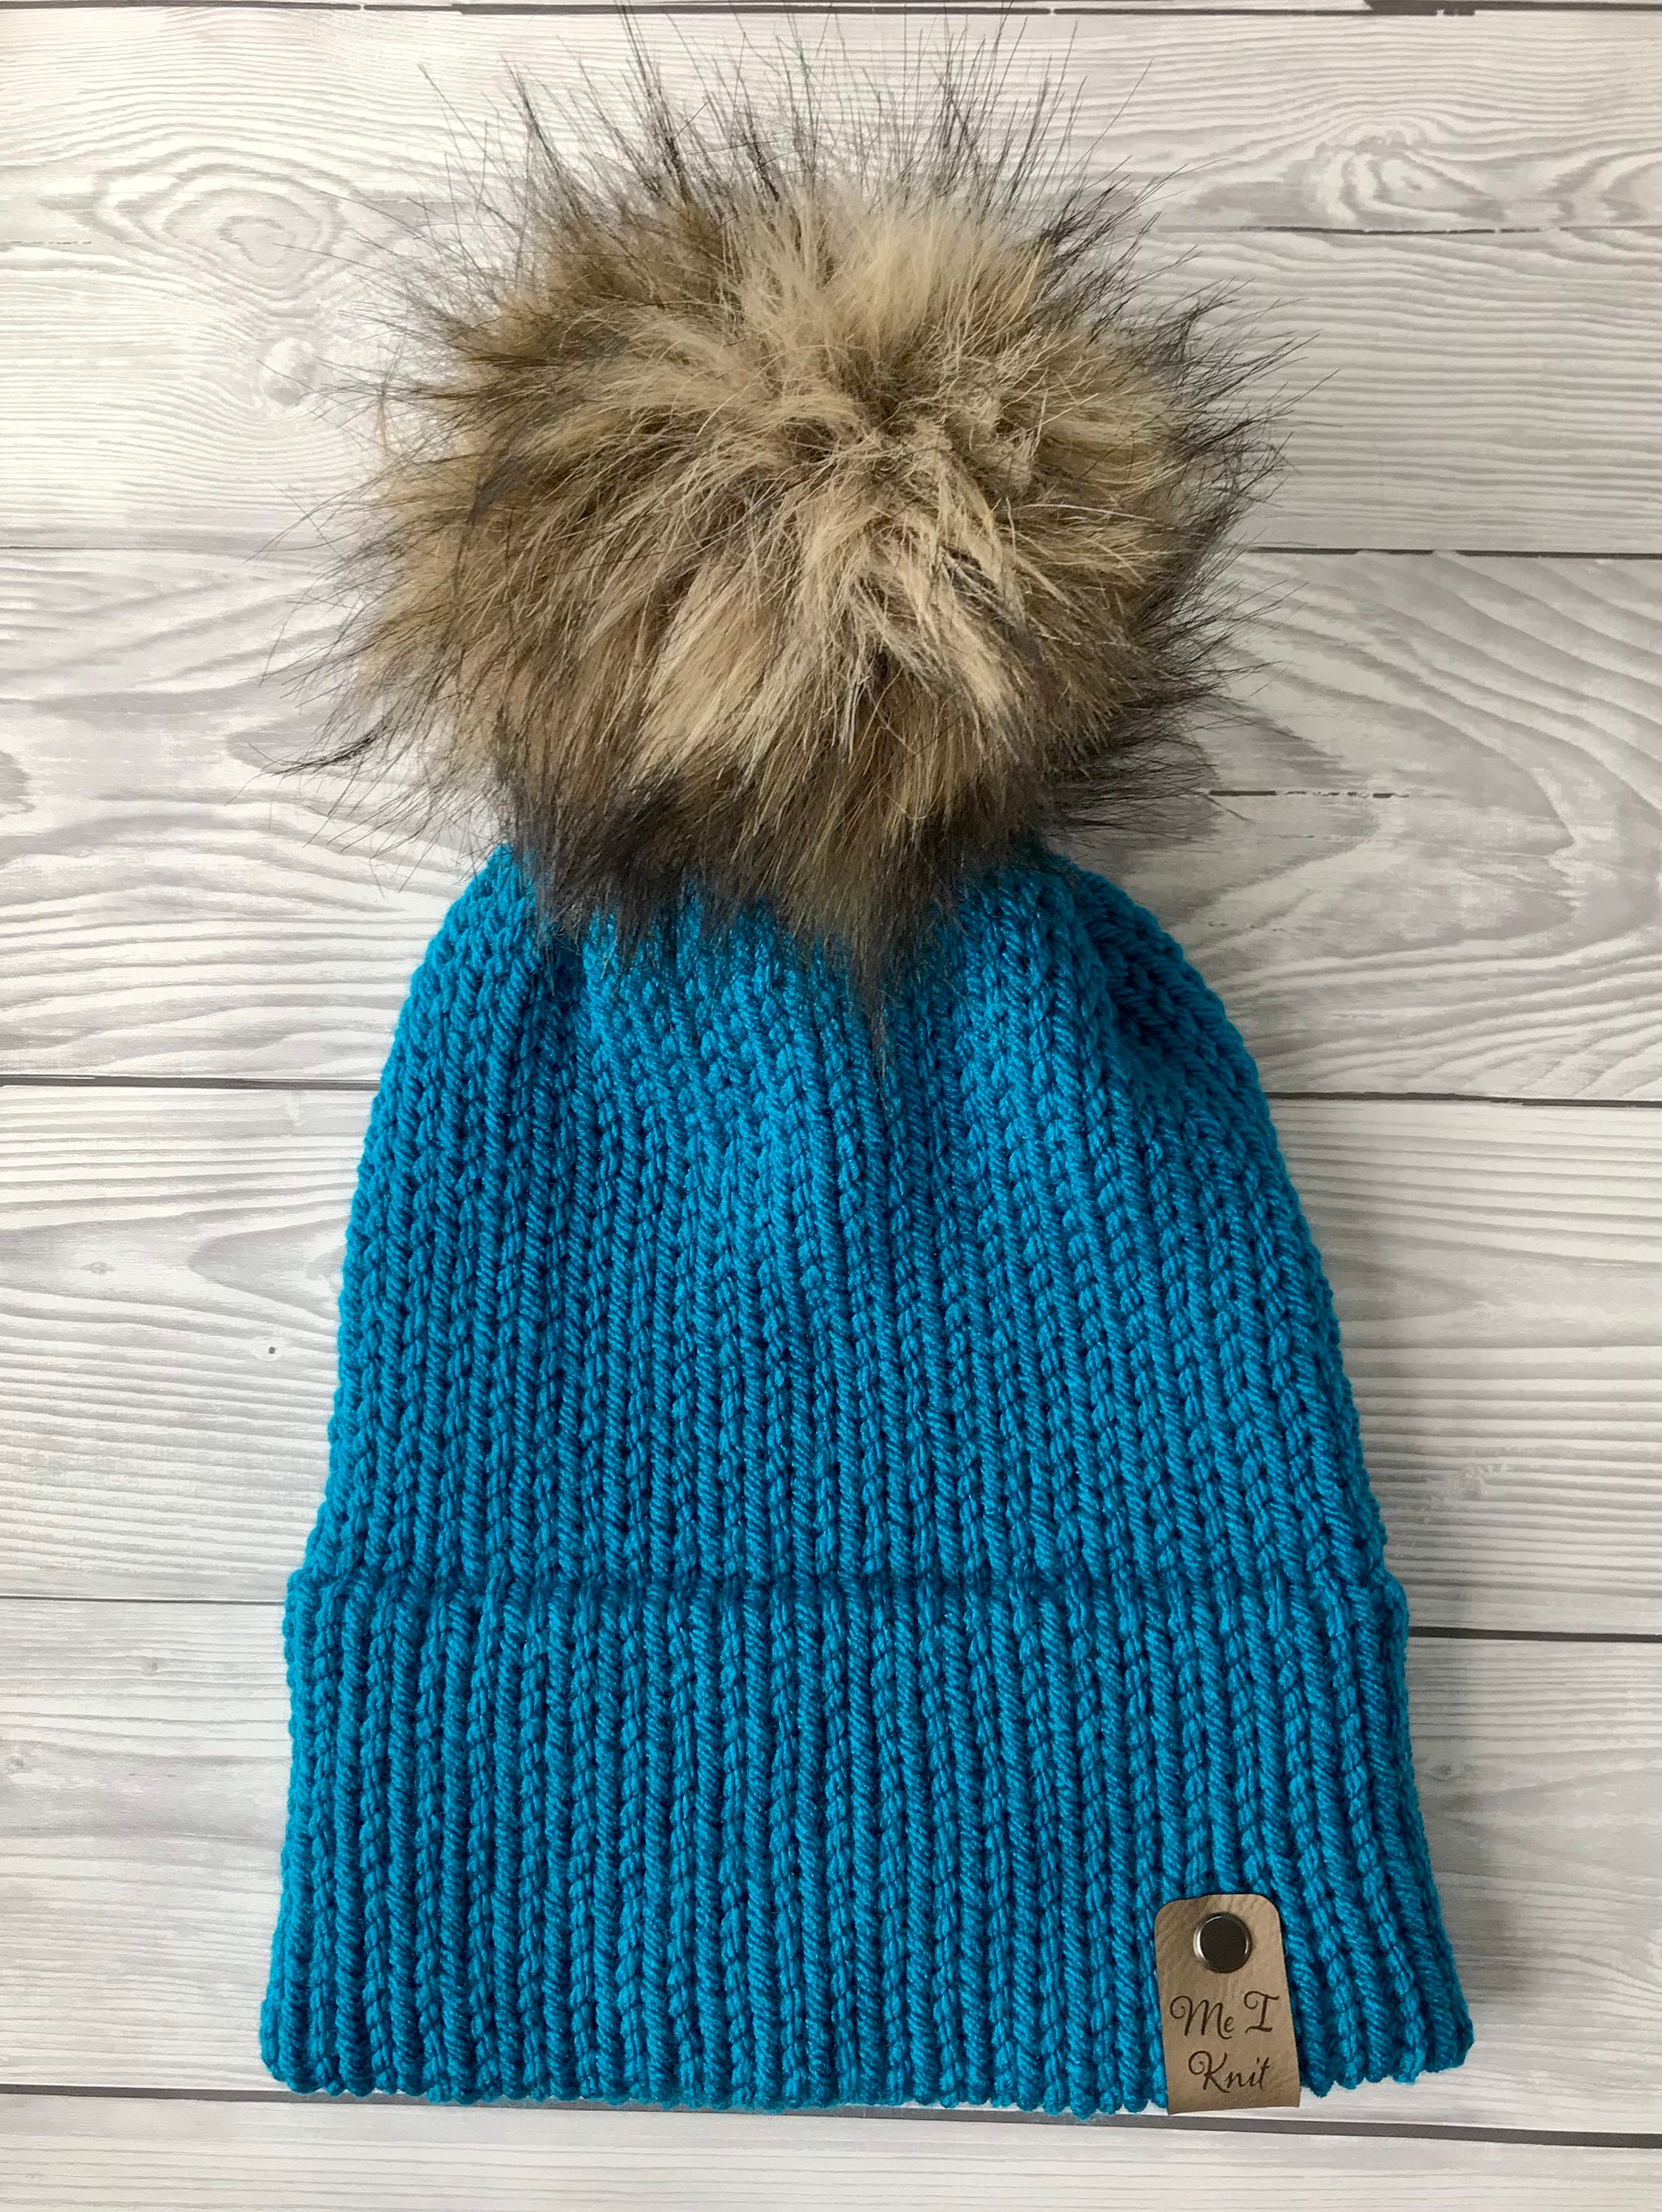 Handmade double brim beanies with & without pompom Navy | Etsy